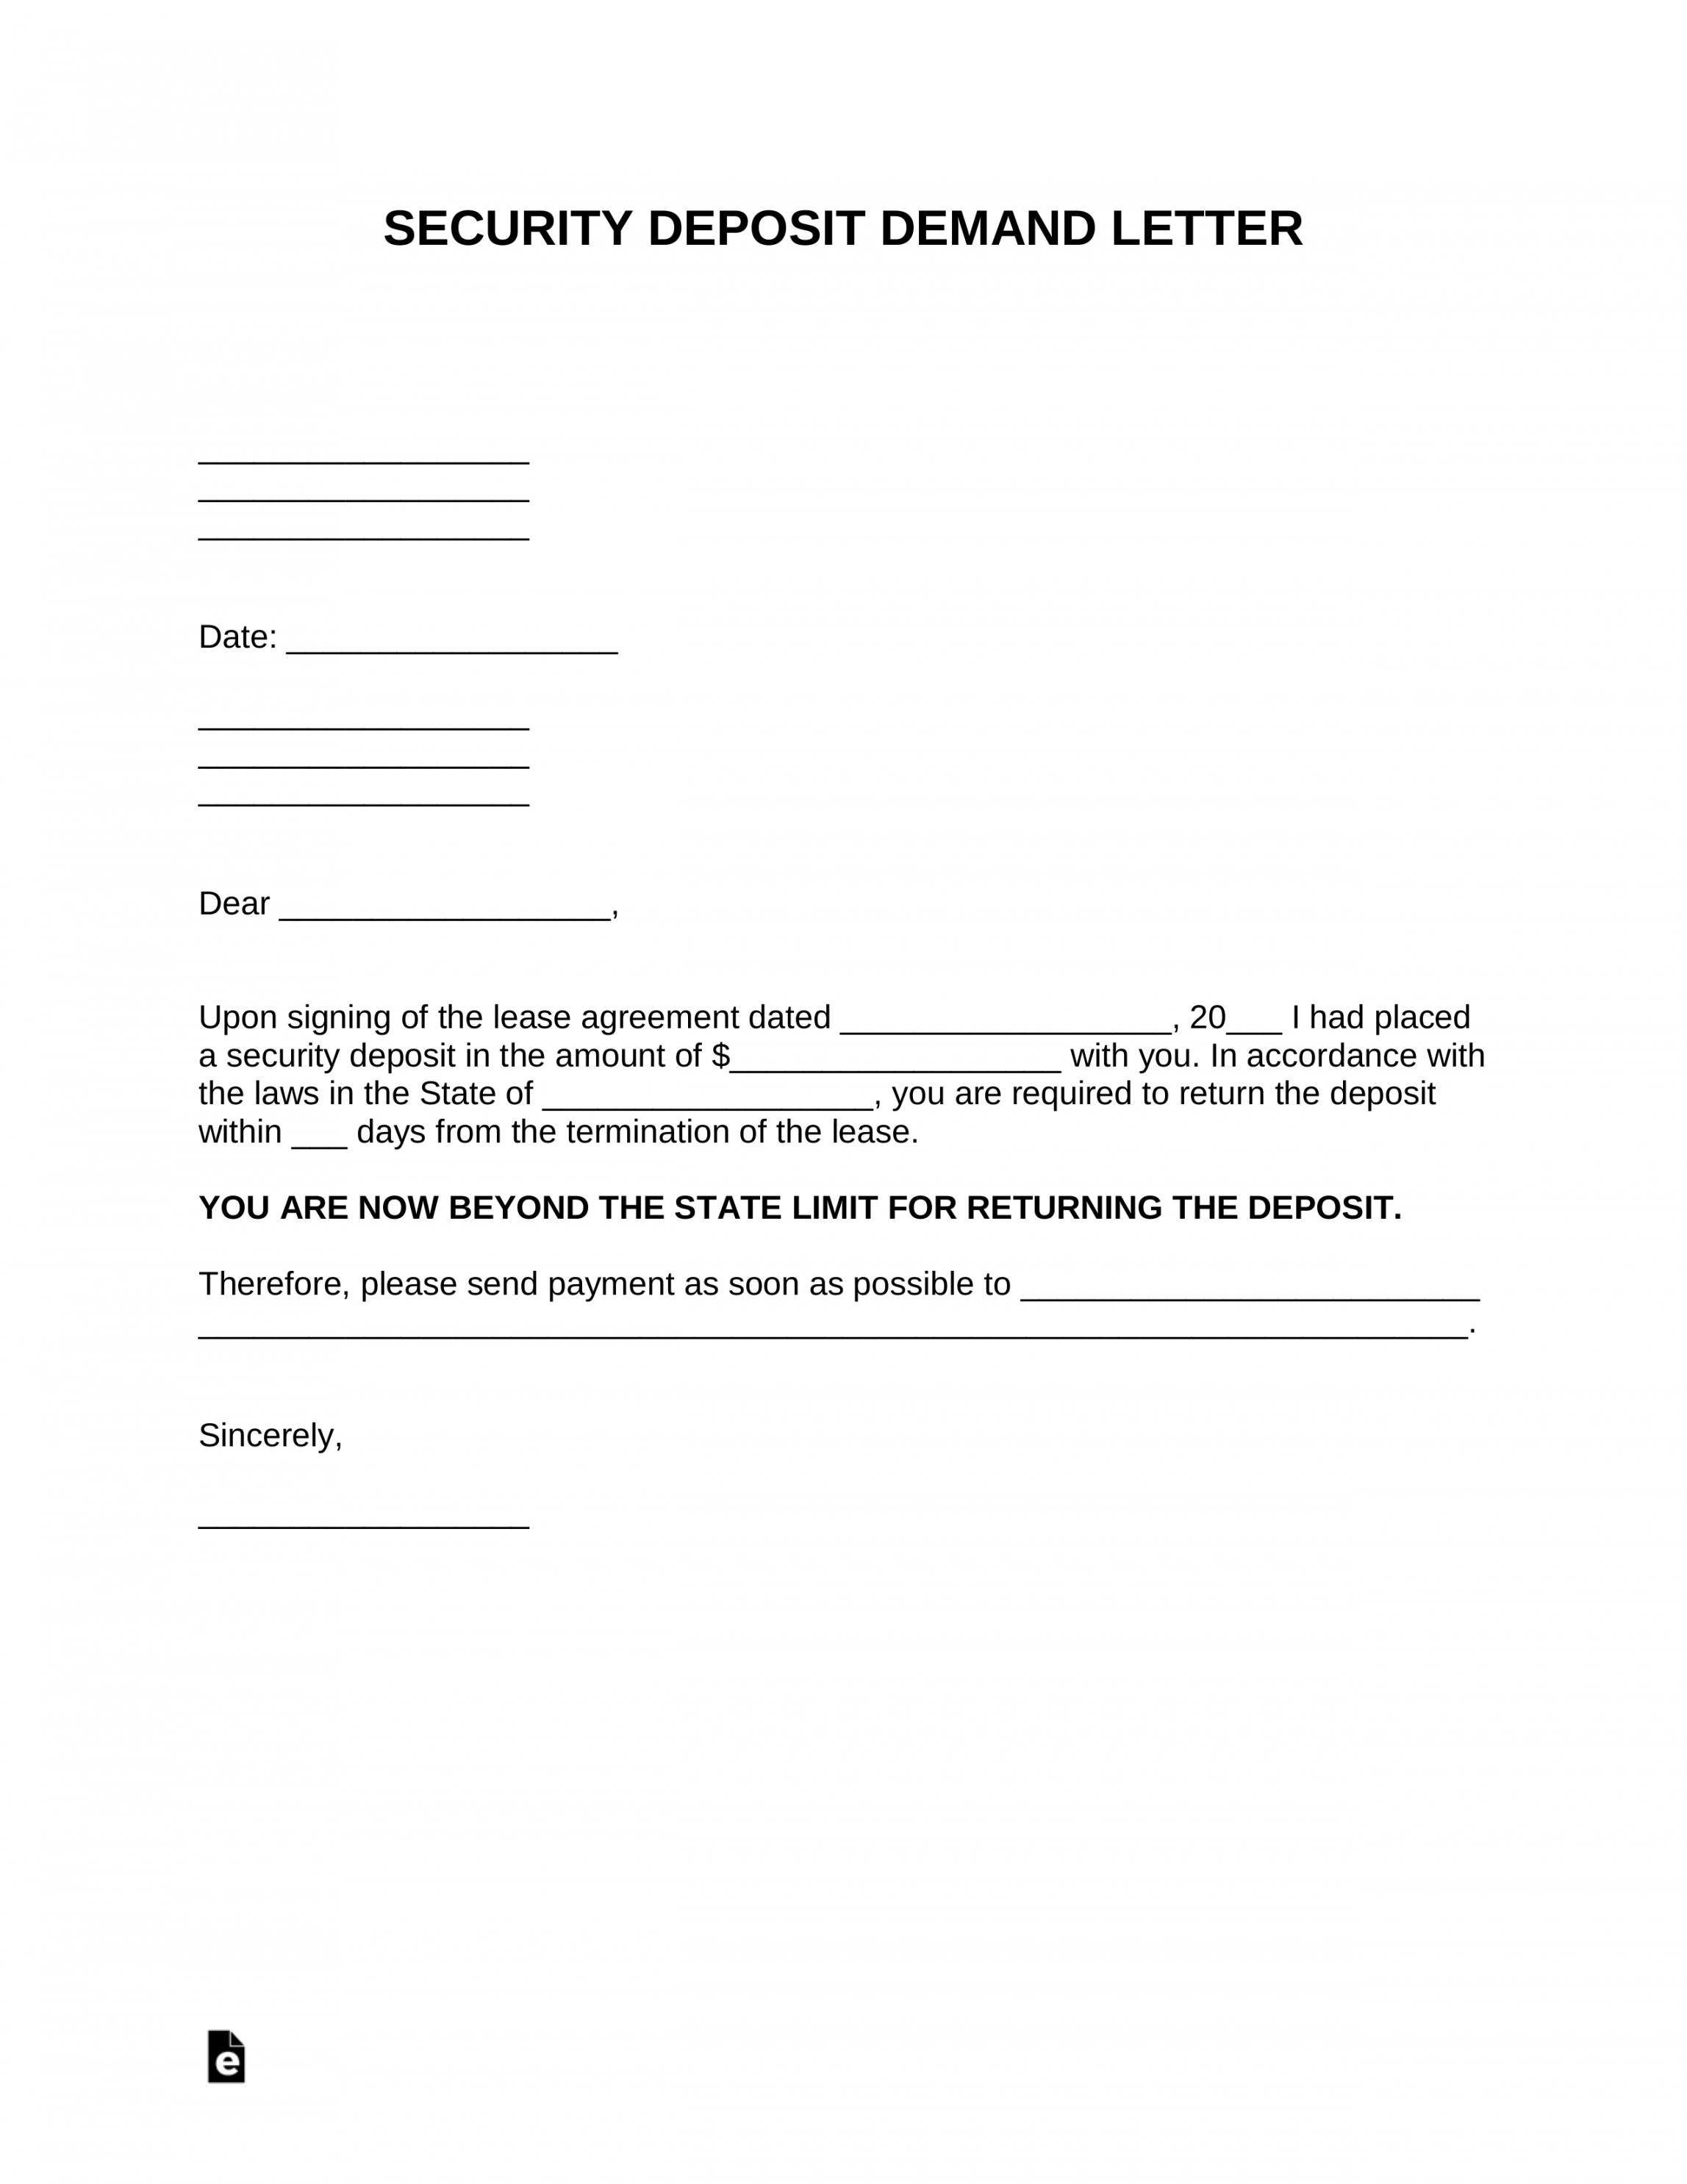 free free security deposit demand letter template  pdf  word security deposit demand letter template example